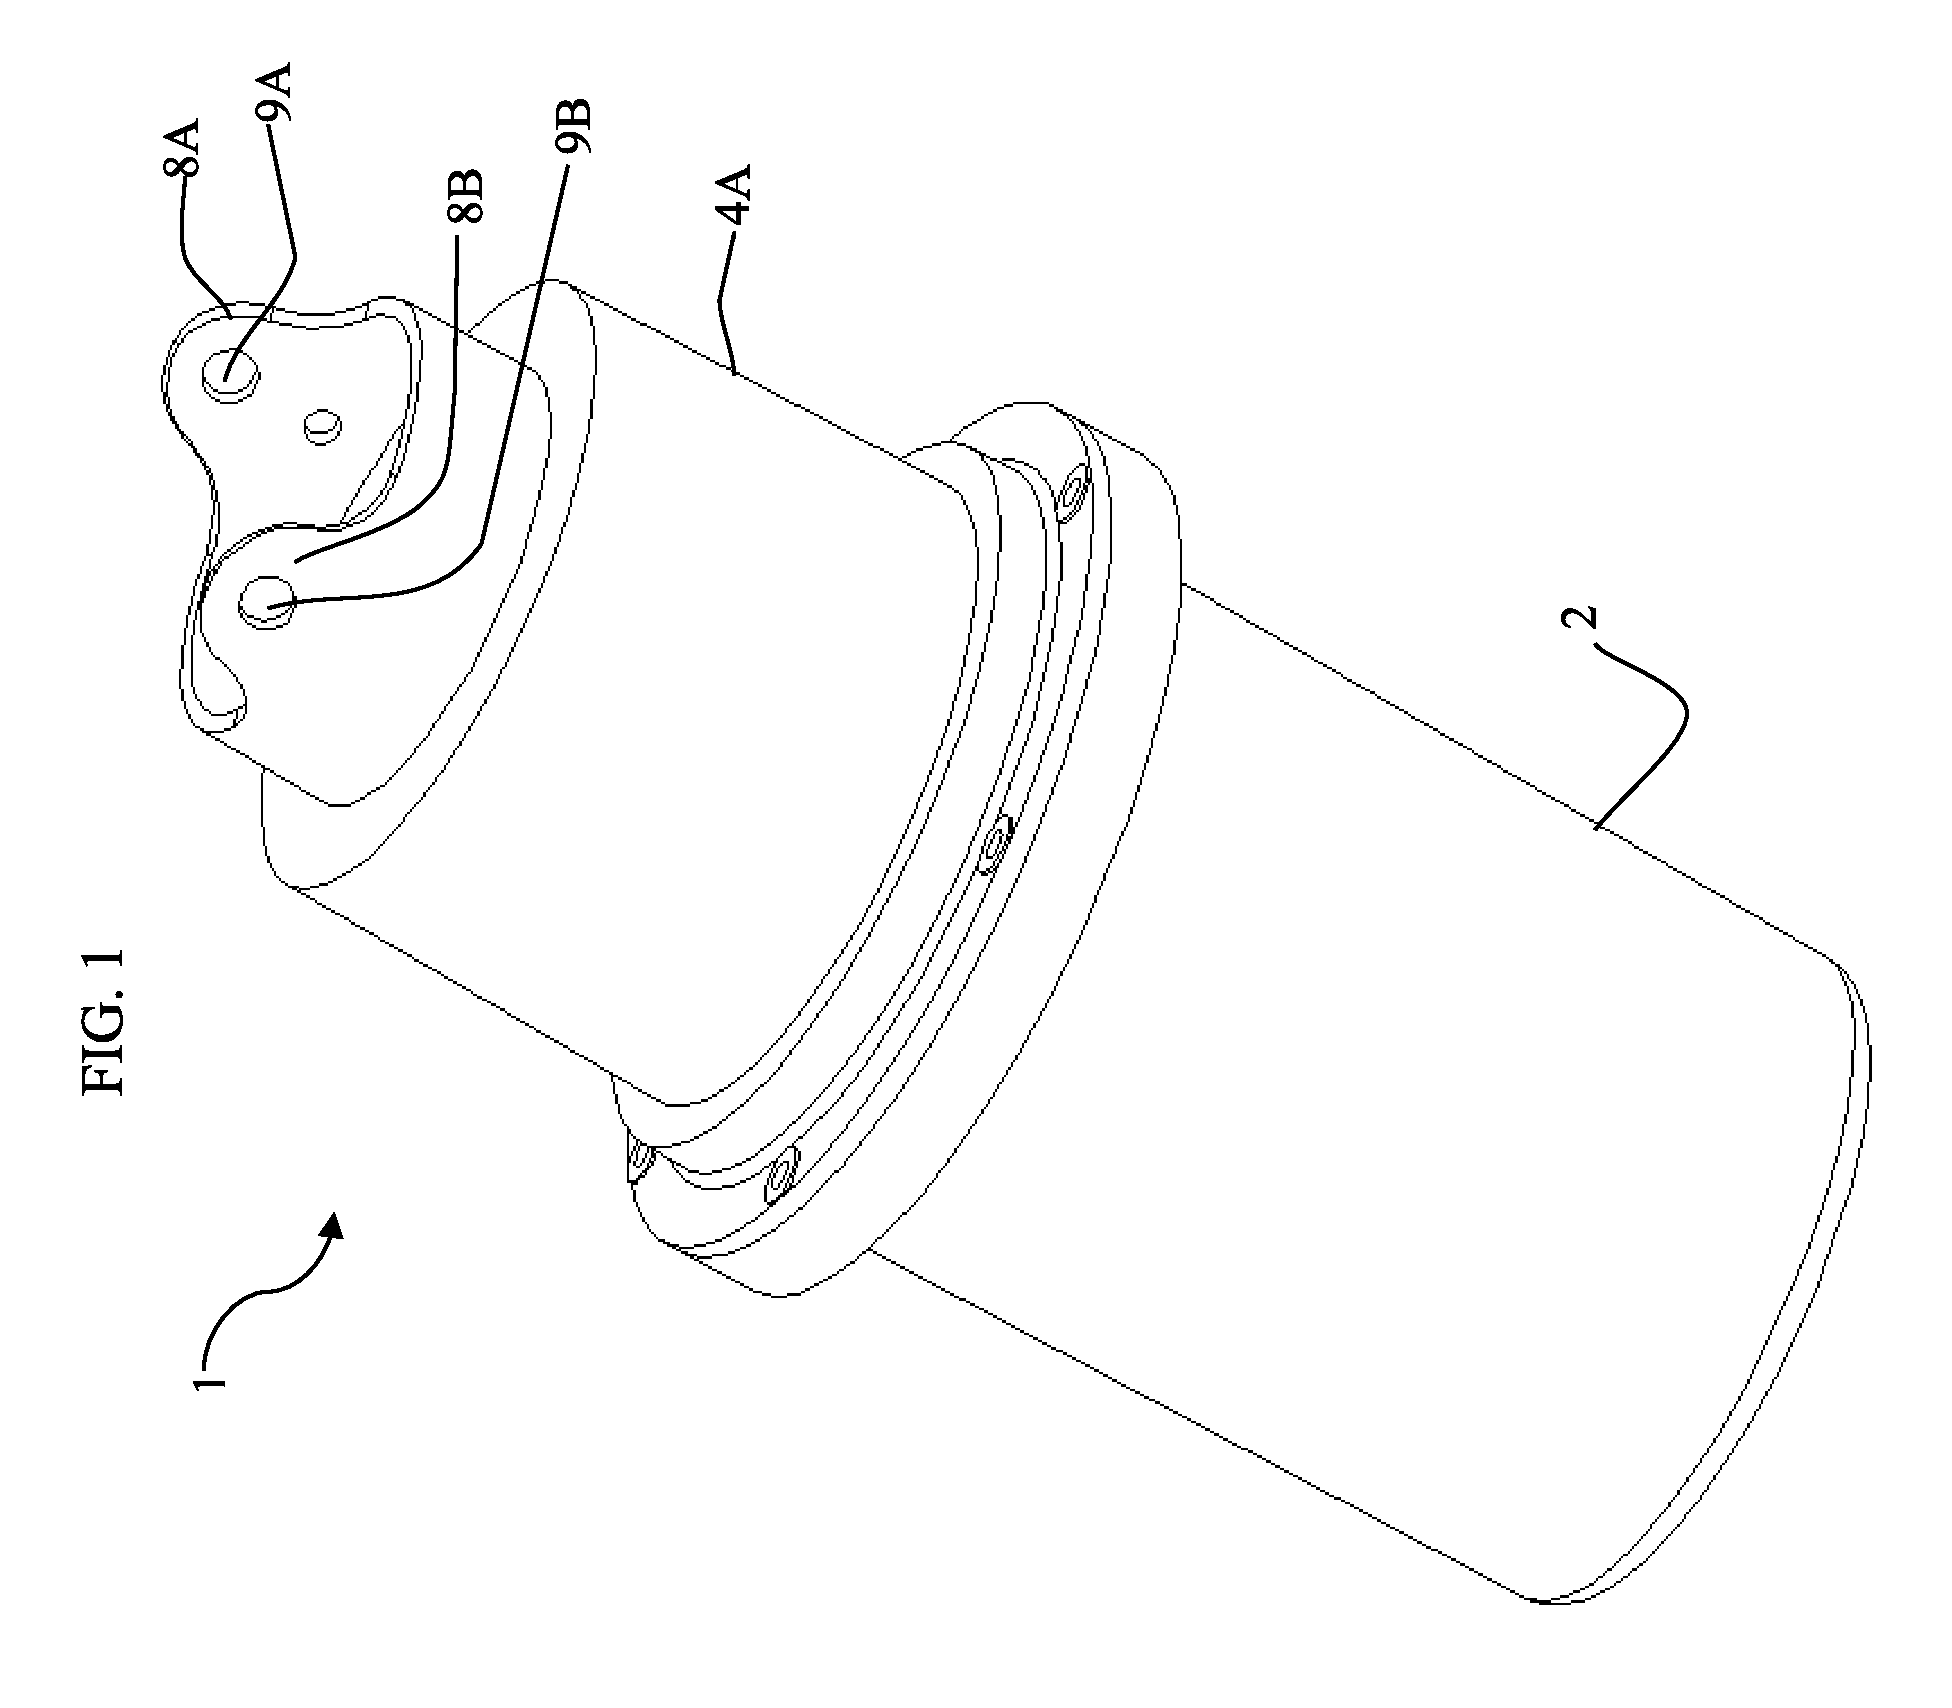 Underwater Light Having A Faceted Water-Cooled Thermally Conductive Housing